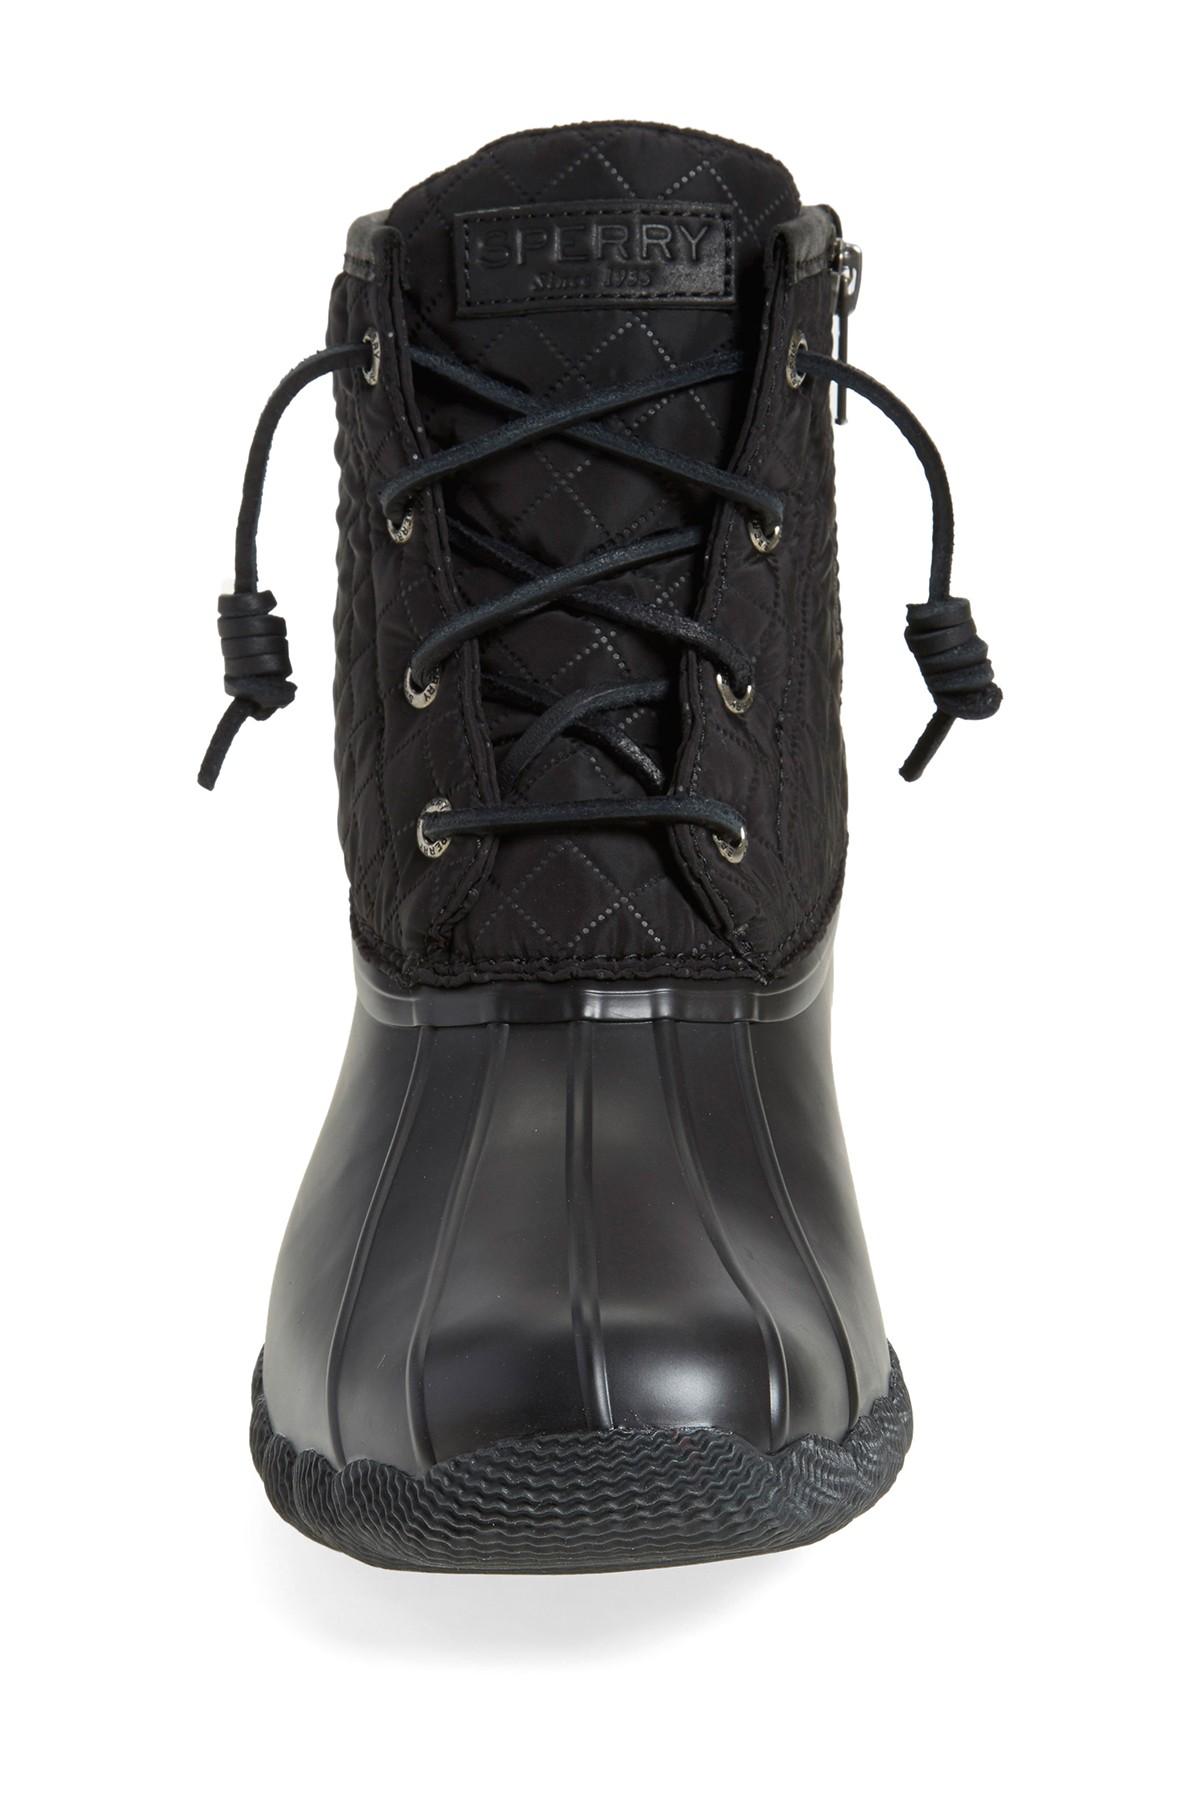 sperry saltwater quilted duck boot black